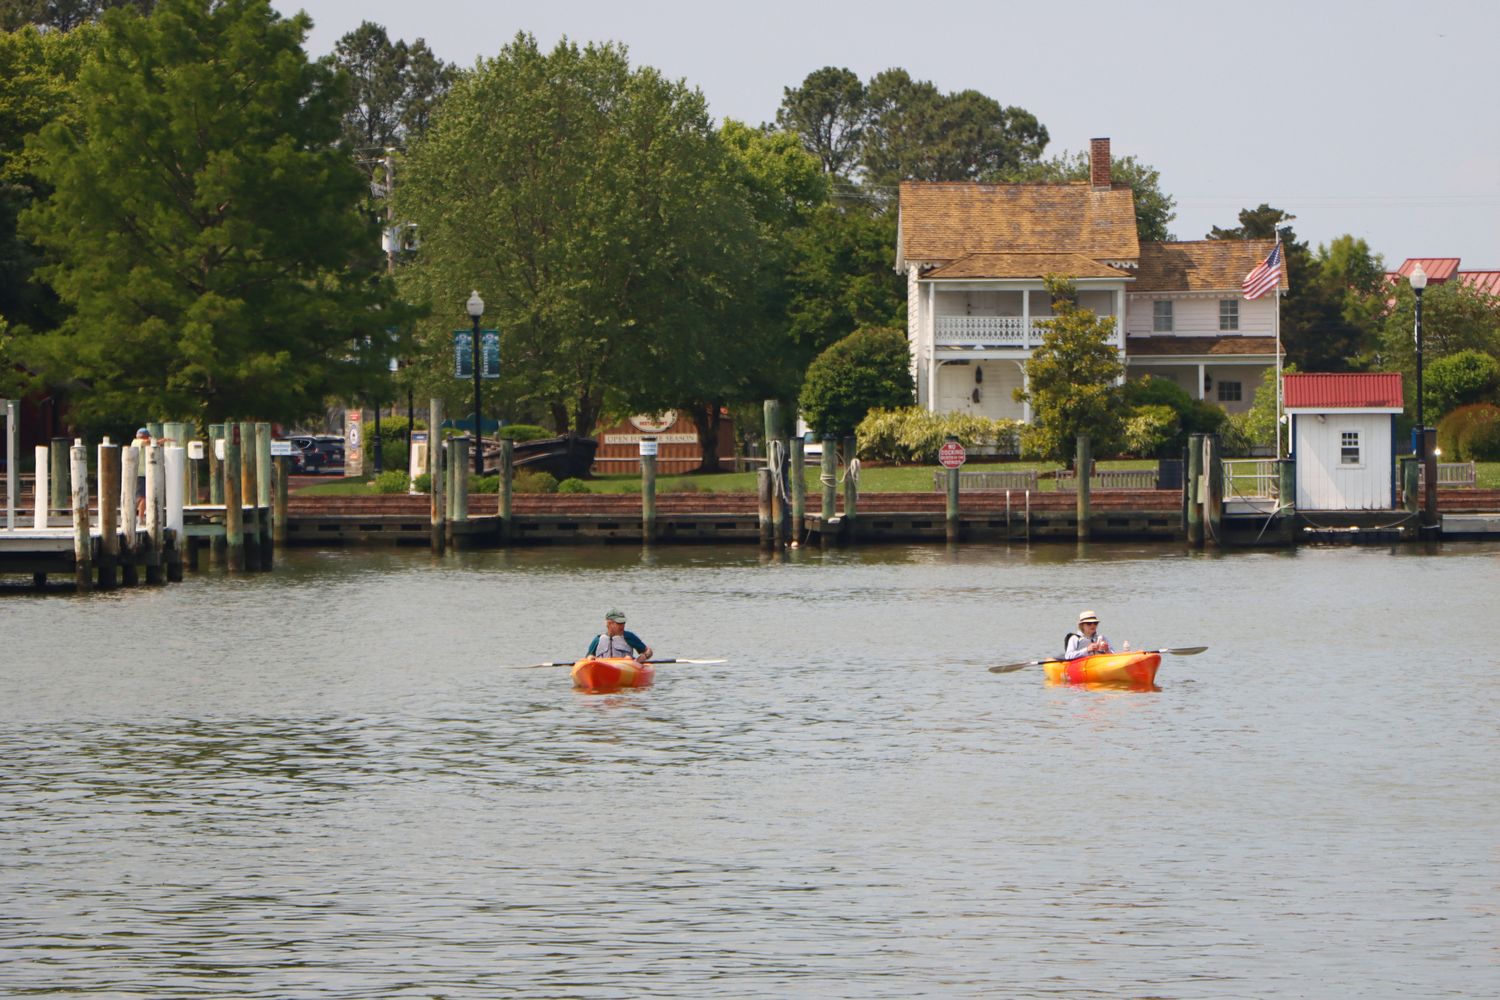 2 people kayaking at the marina in St. Michaels, MD